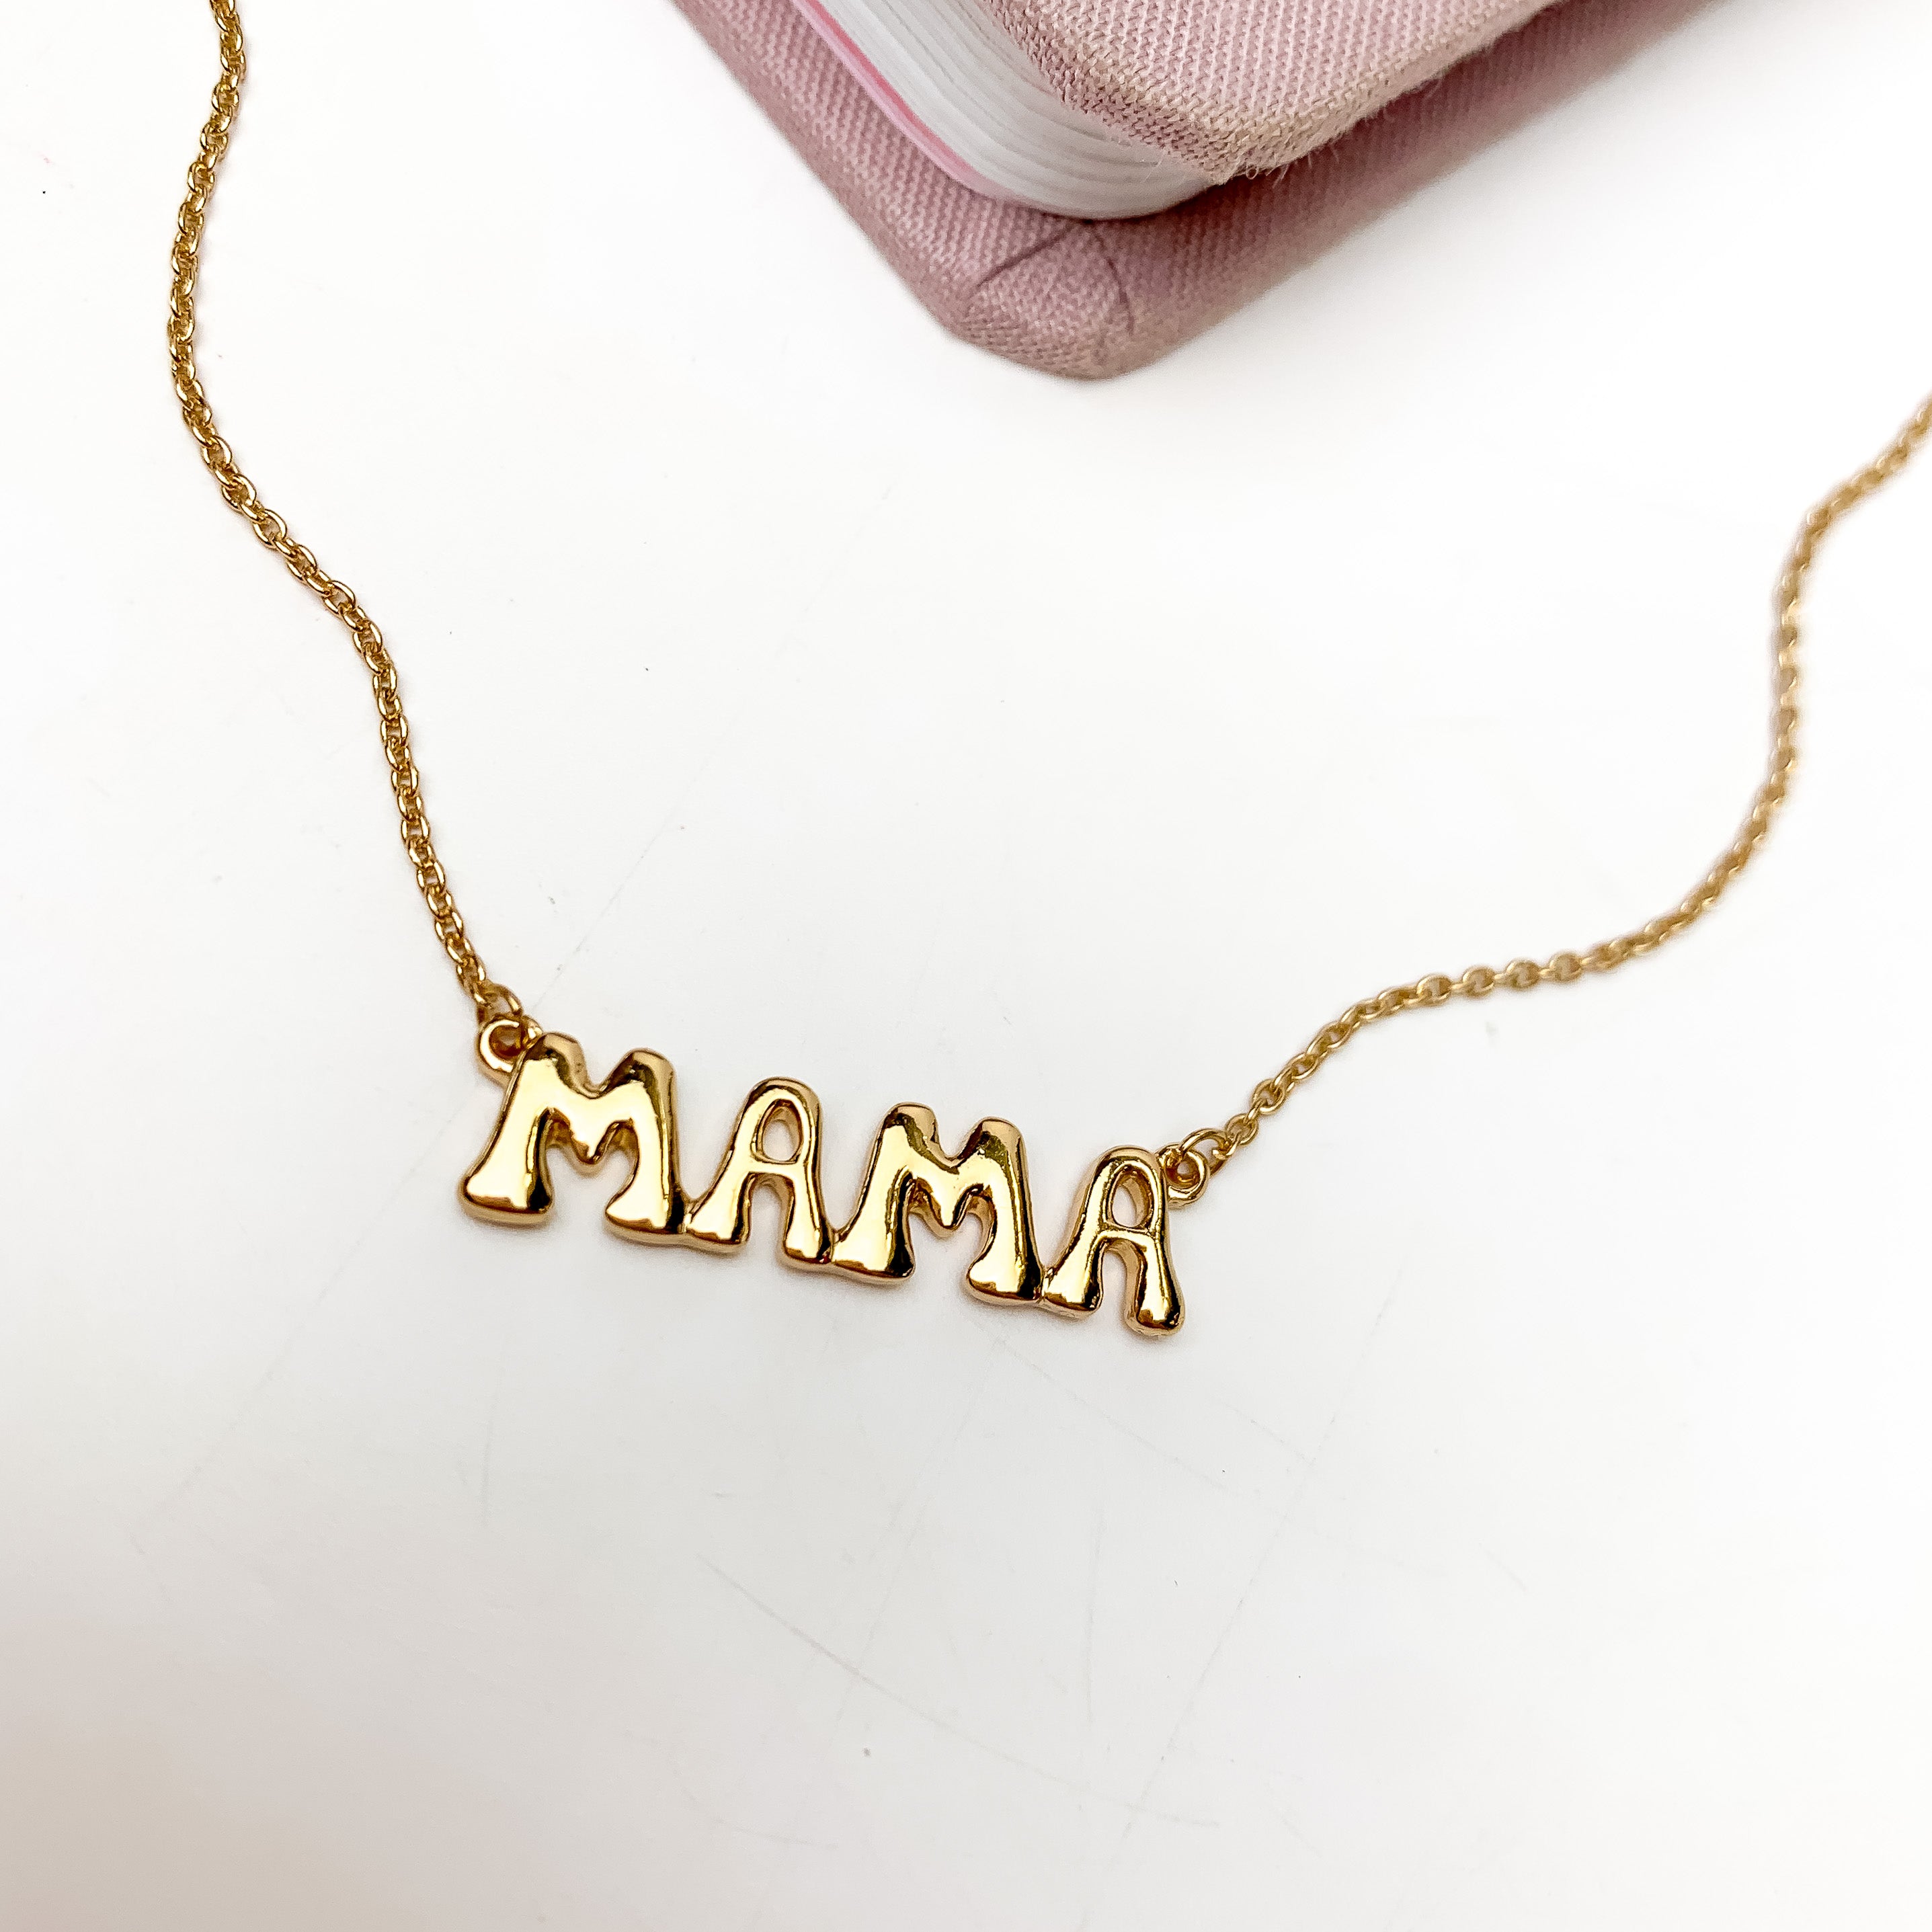 Mama Bubble Letter Chain Necklace in Gold Tone